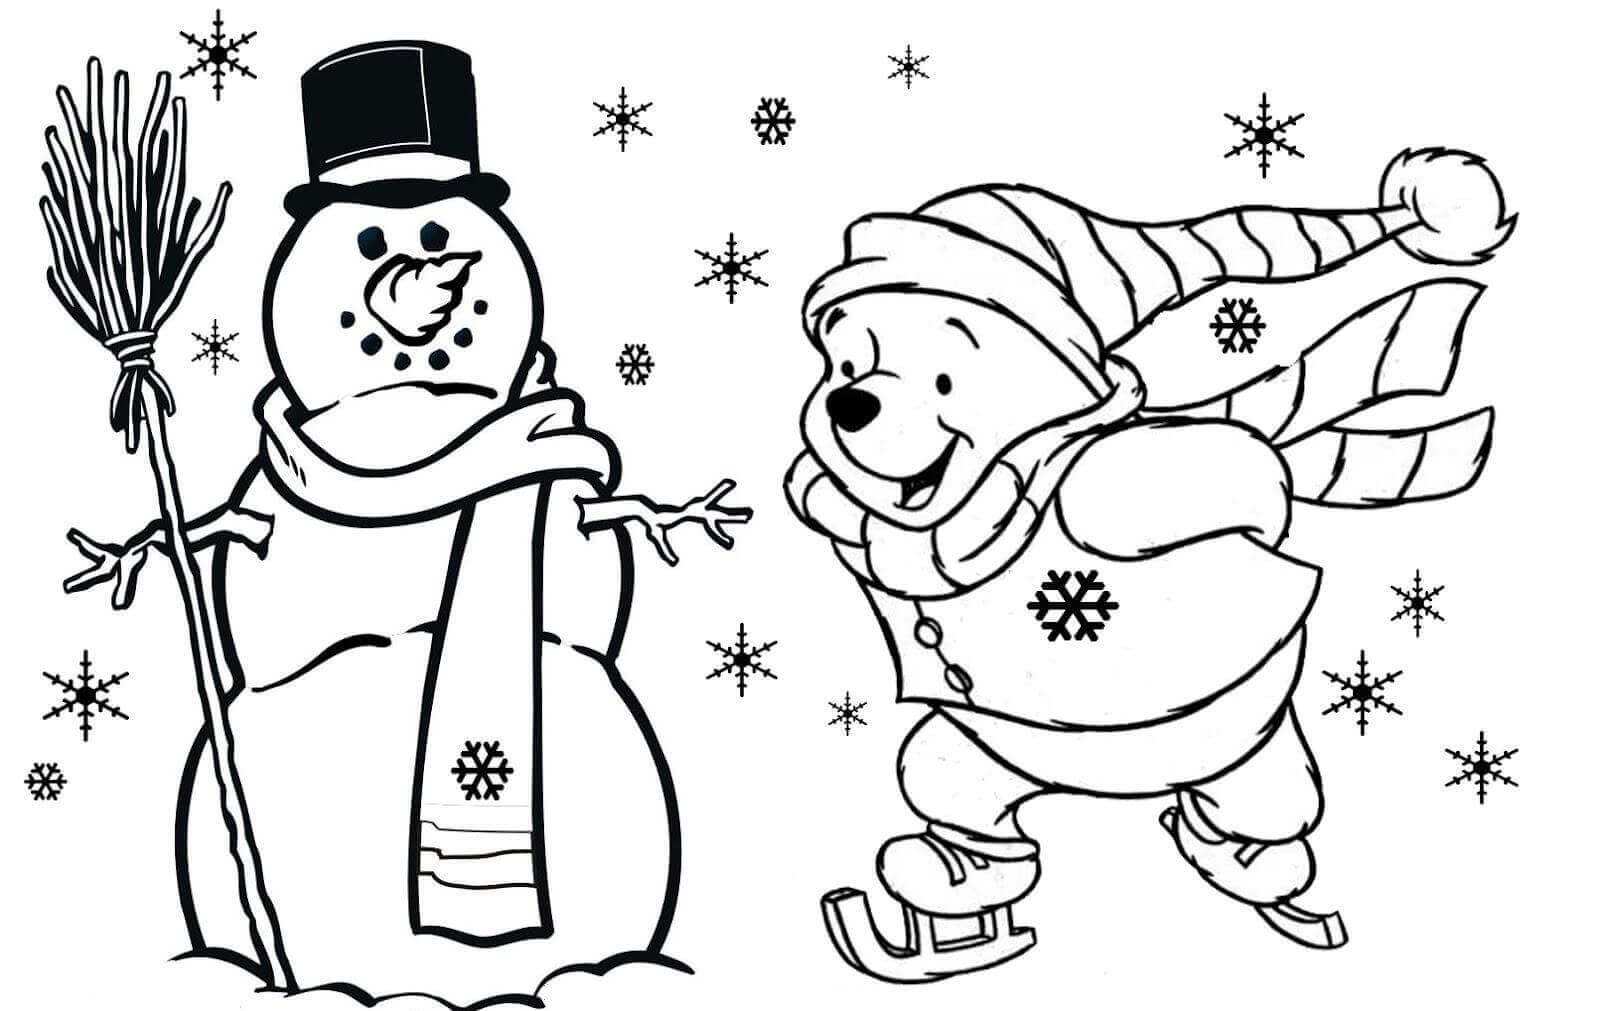 Pooh and Snowman Winter Coloring Page